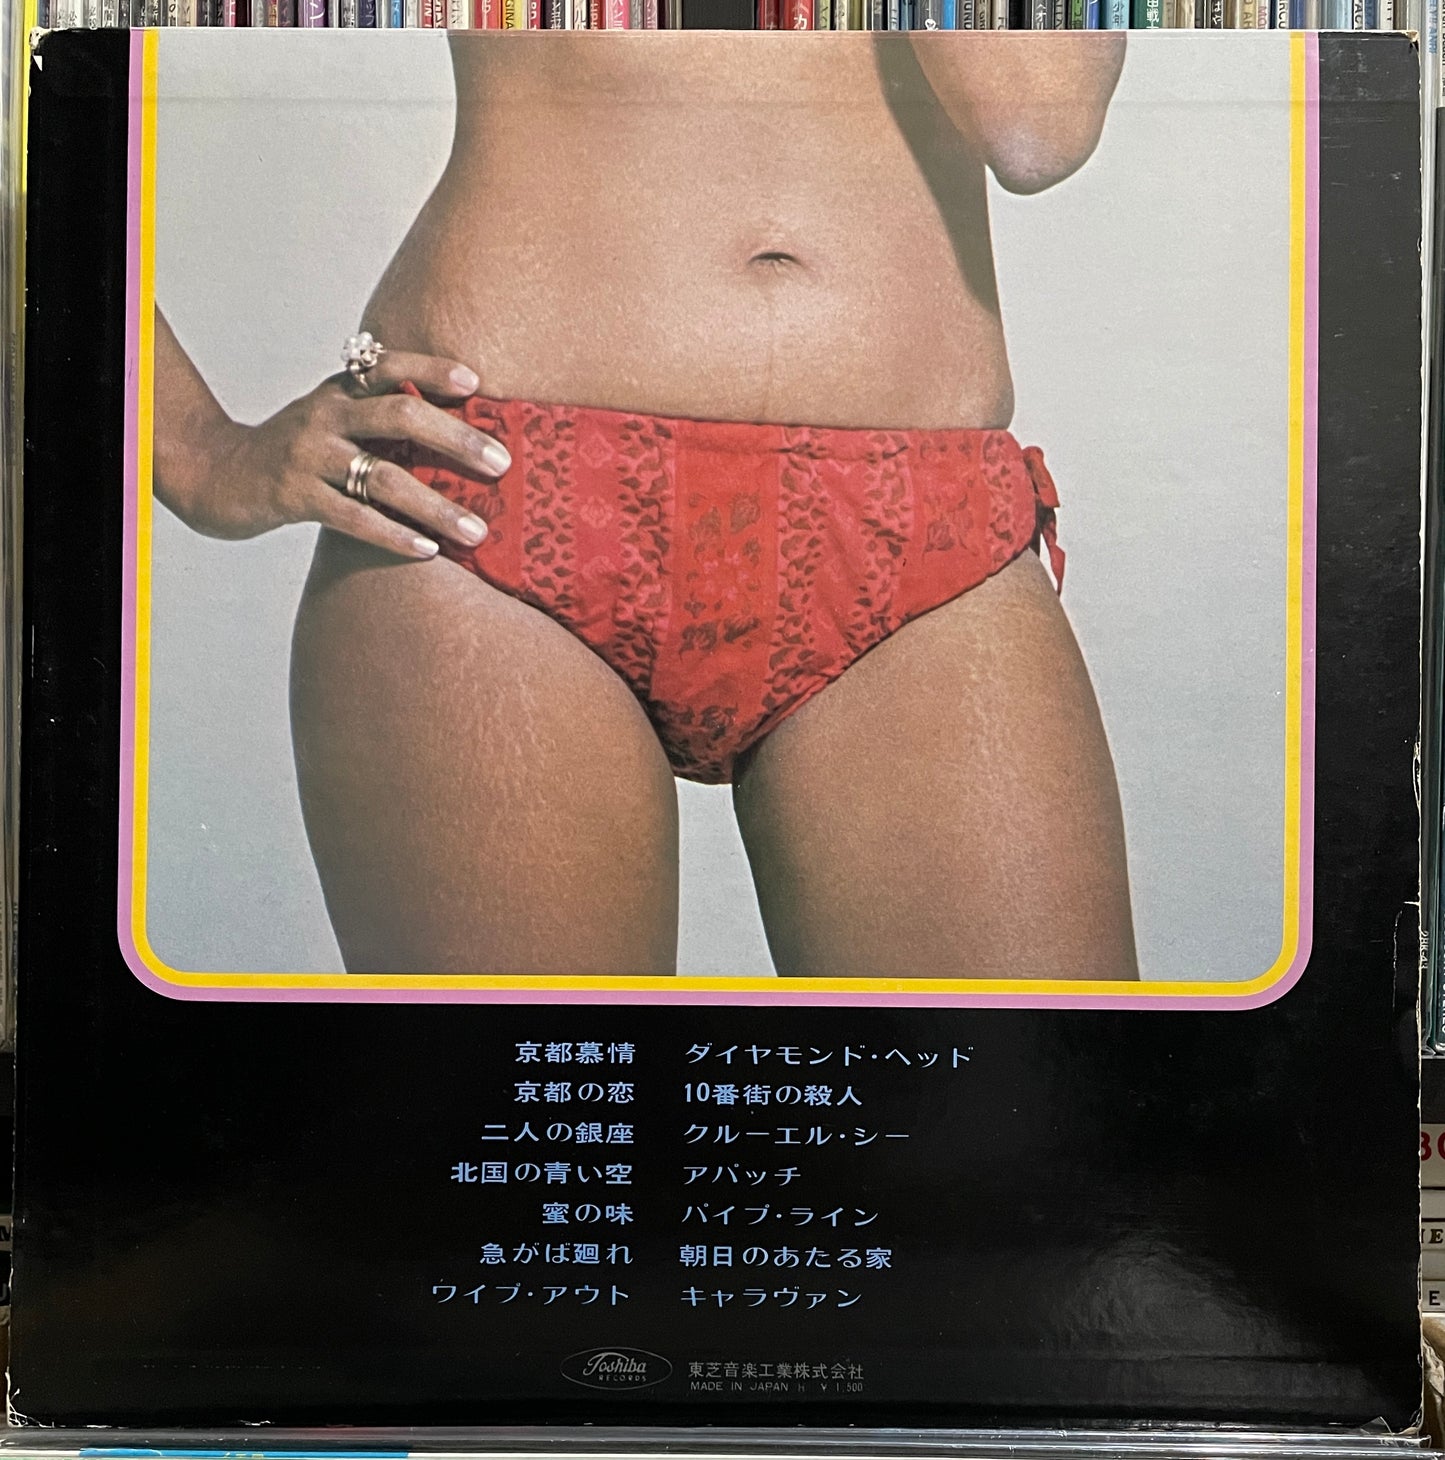 Jimmy Takeuchi & His Exciters “The Ventures” (19??)